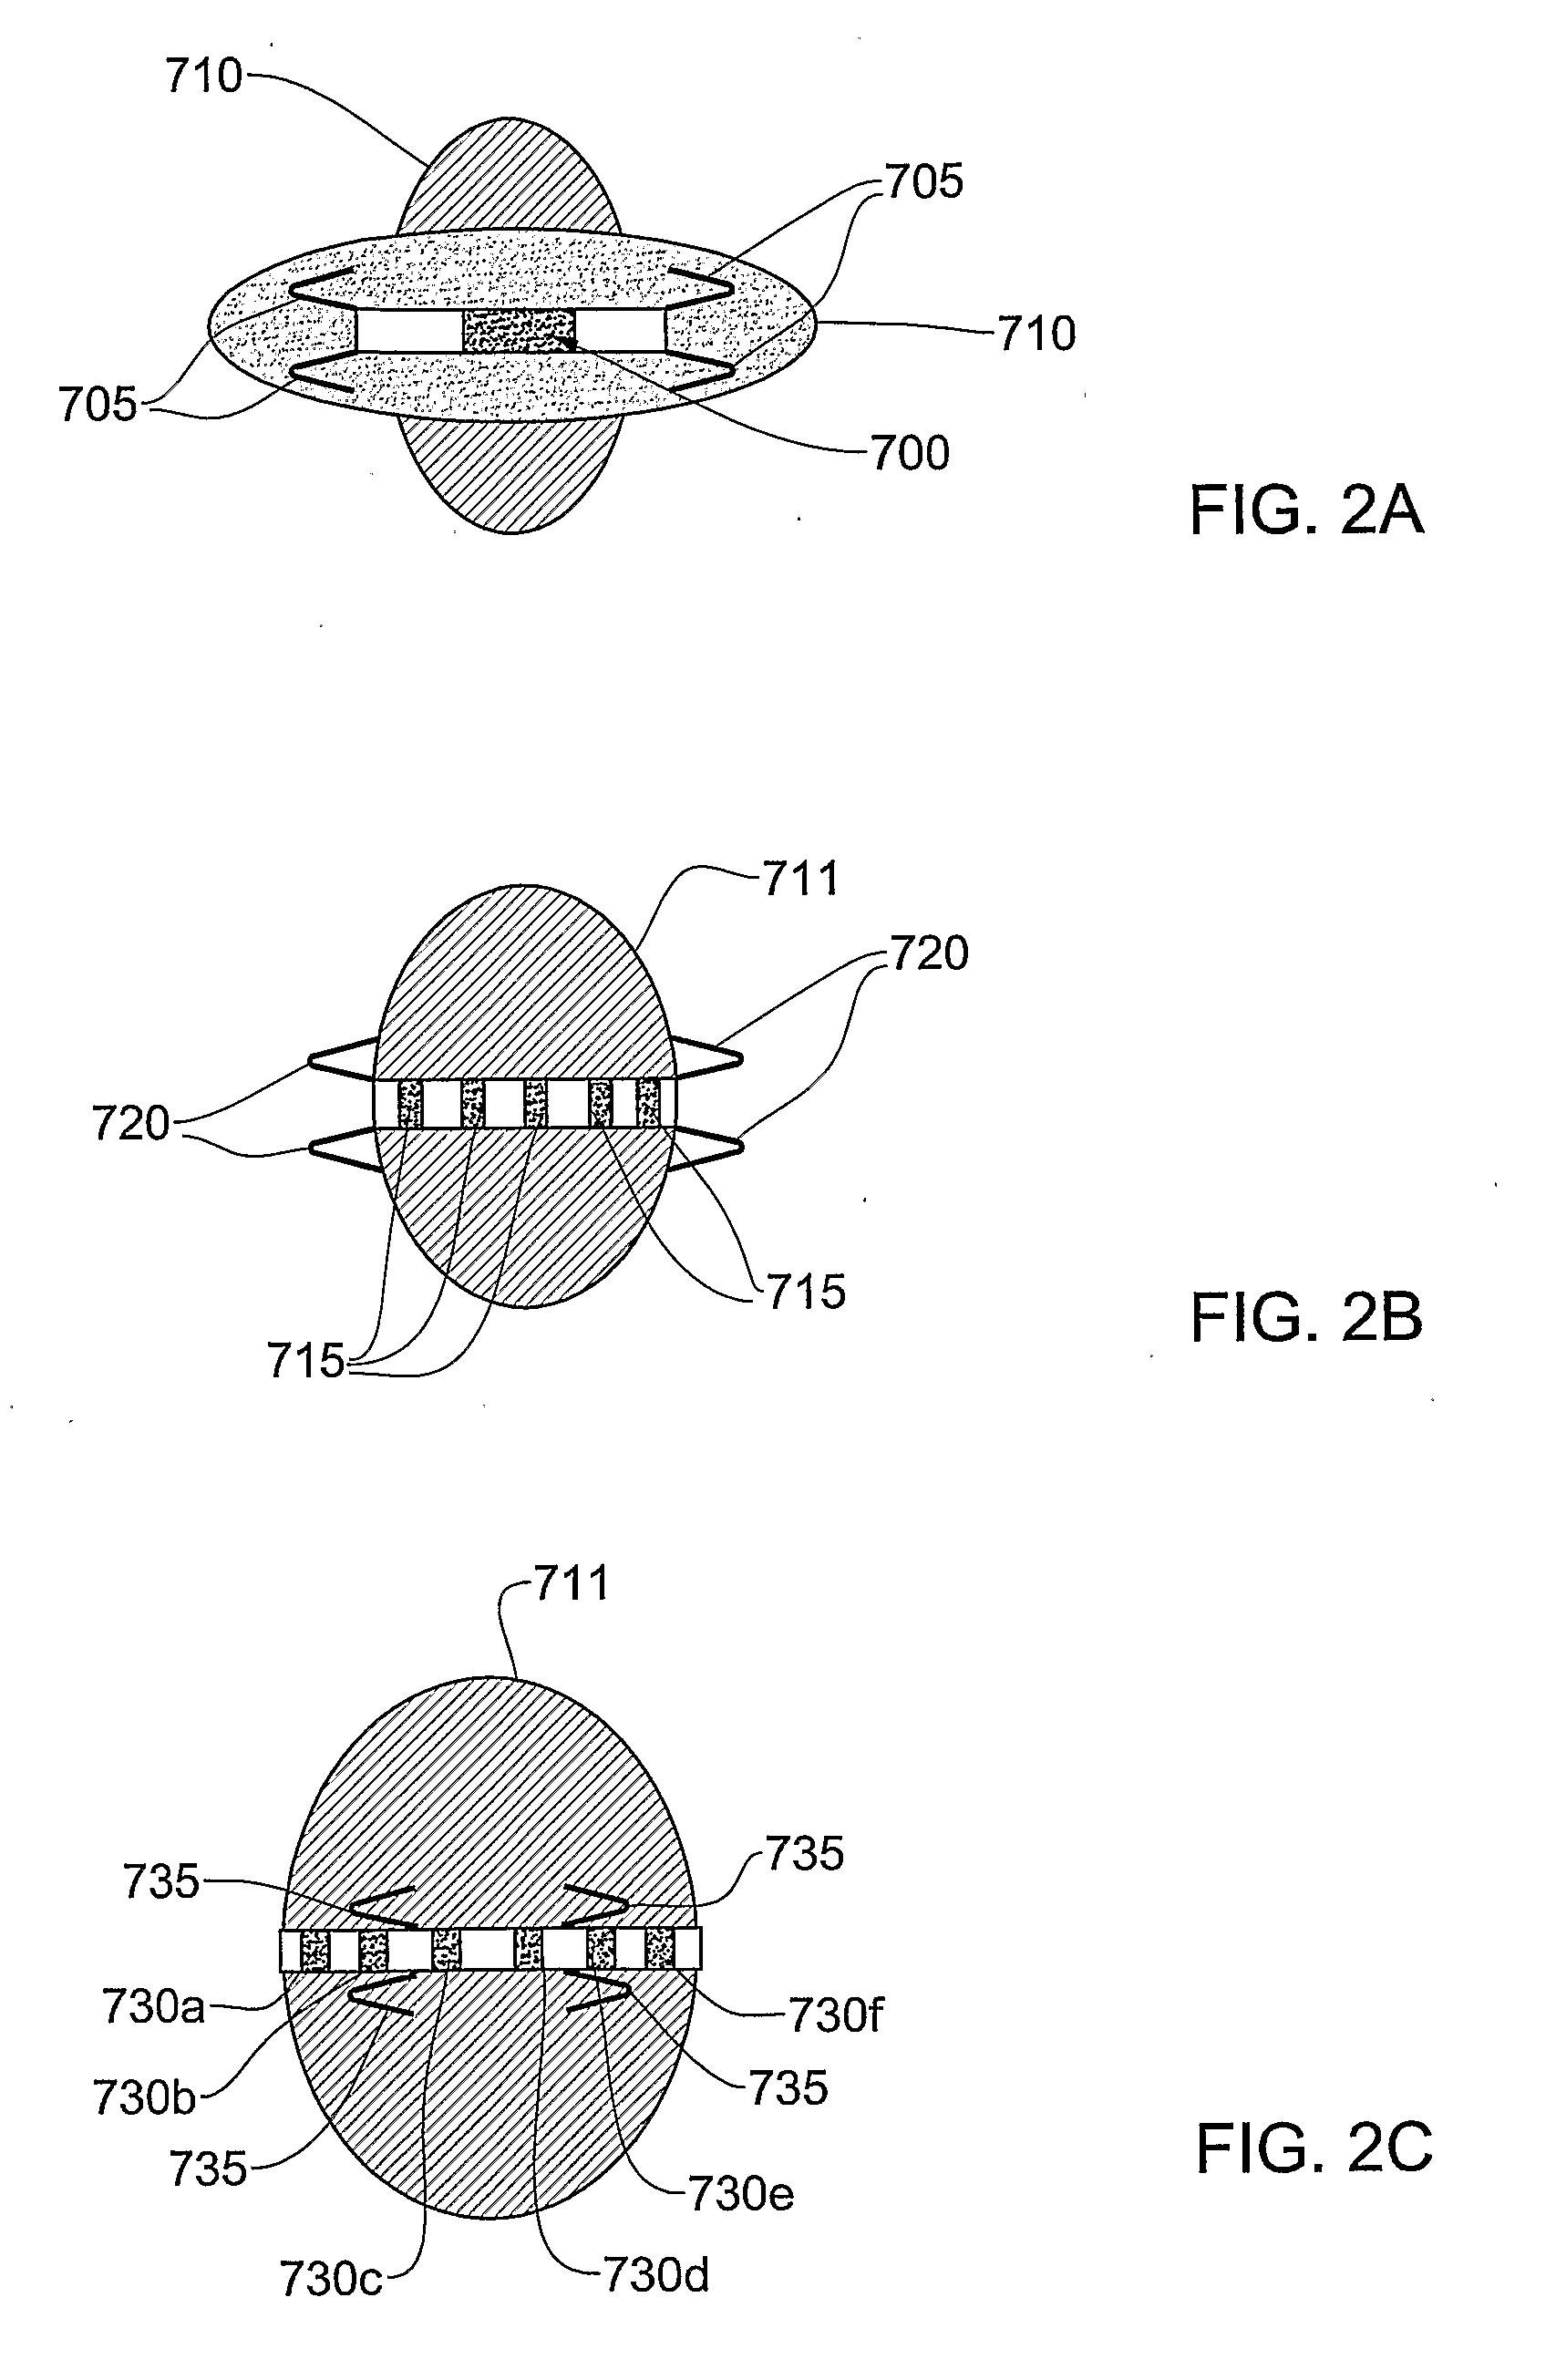 System and method for analysis and treatment of a body tissue